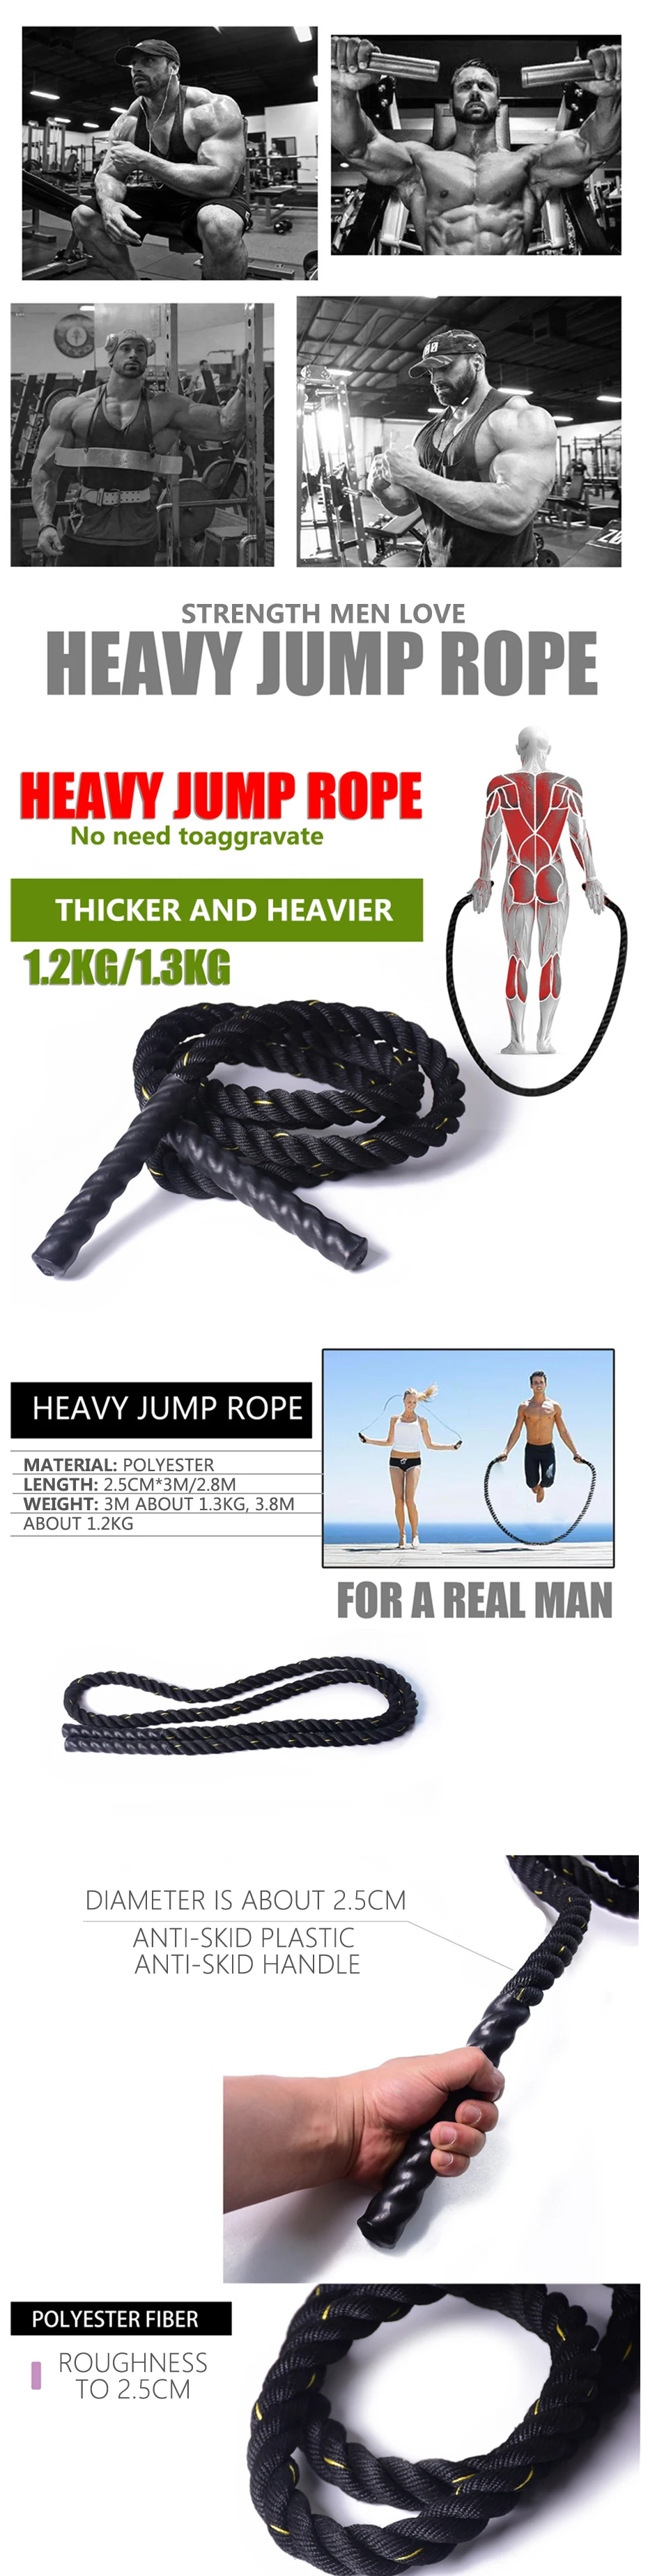 Skipping Rope For Fitness Boxing Jumping Weight Loss Sale Exercise D3P3 